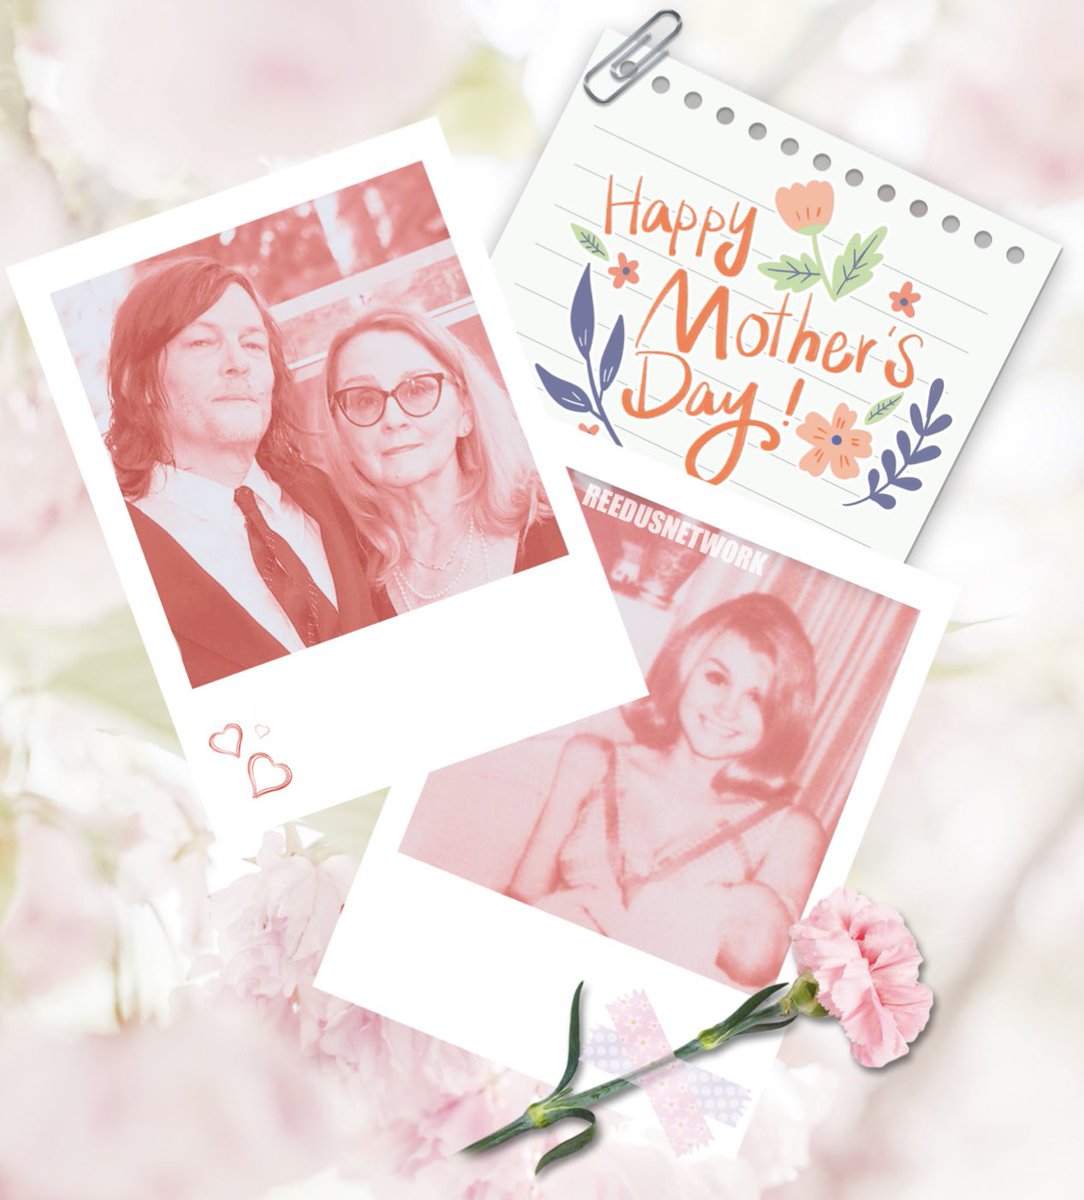 Happy Mother’s Day to all the moms out there! 💐💜 #normanreedus